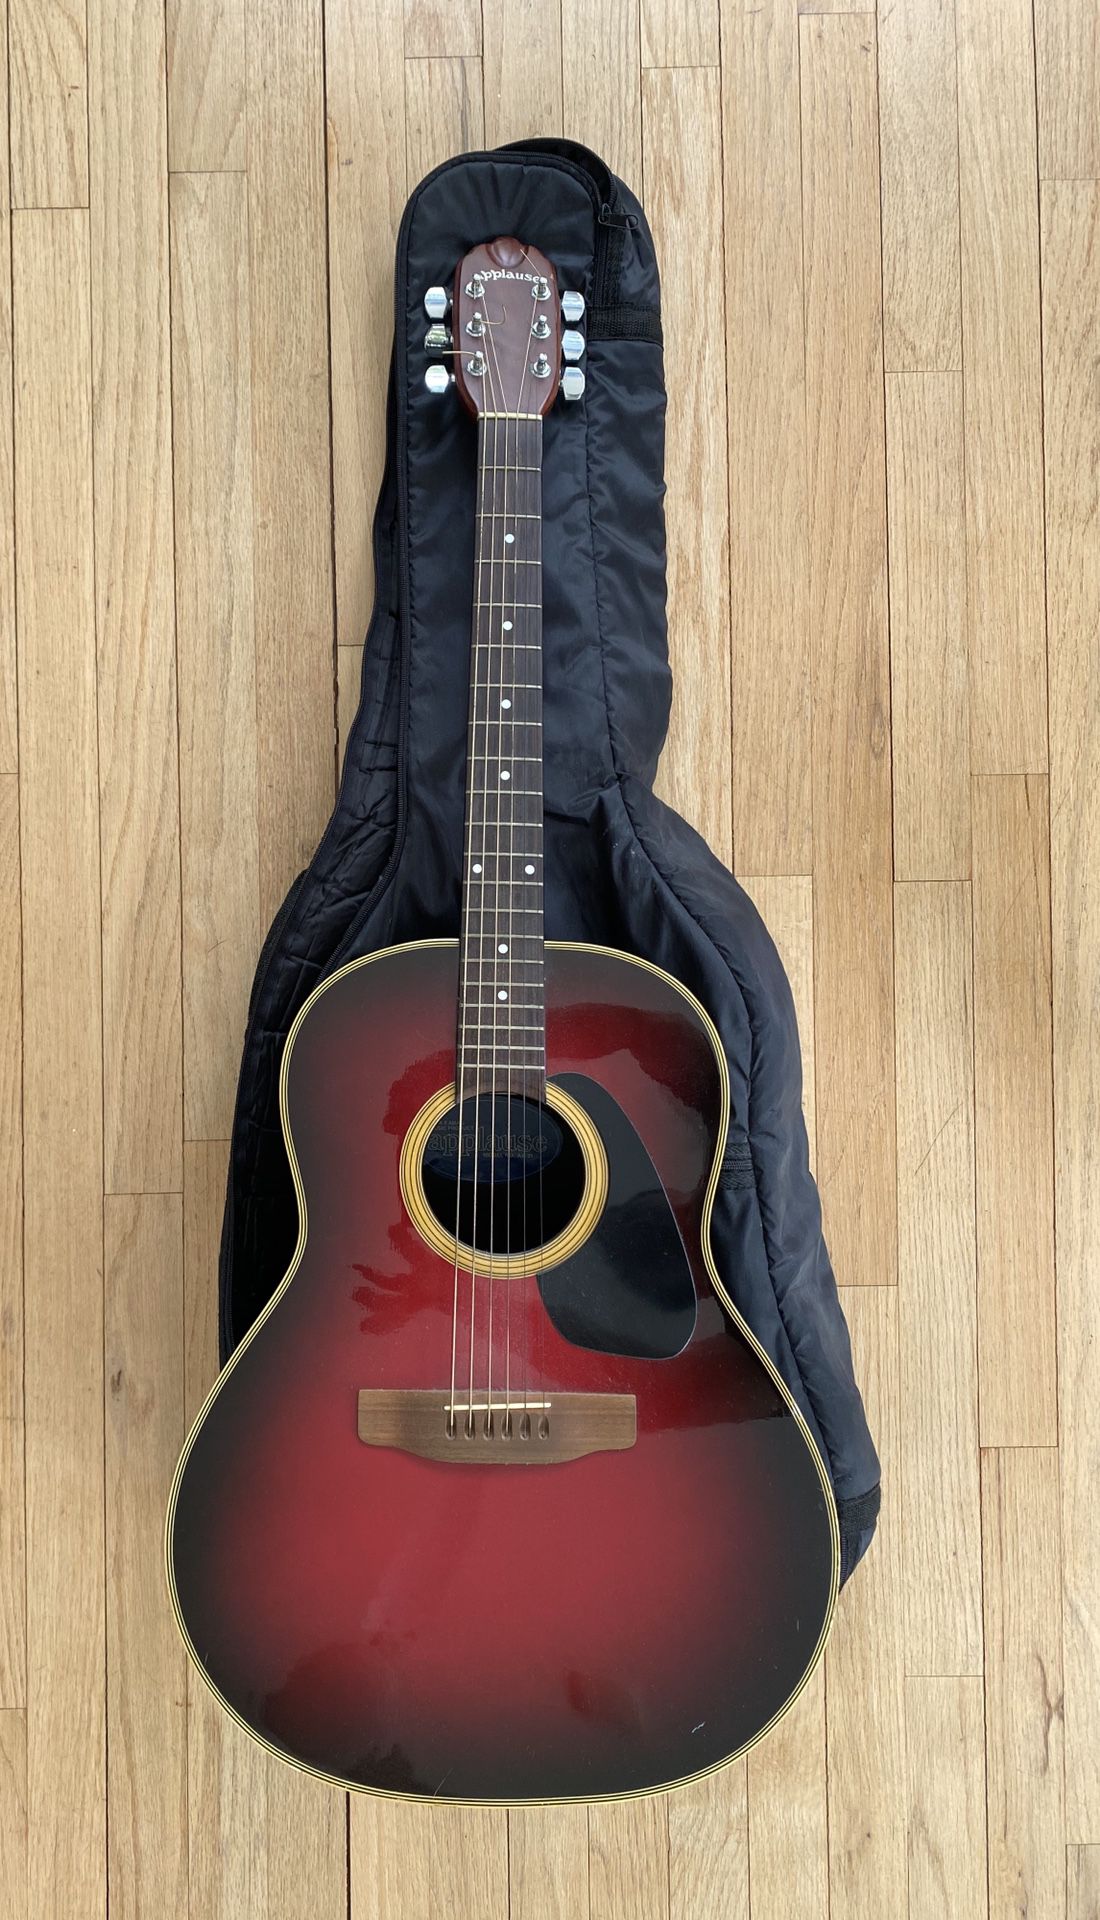 Ovation Applause acoustic guitar